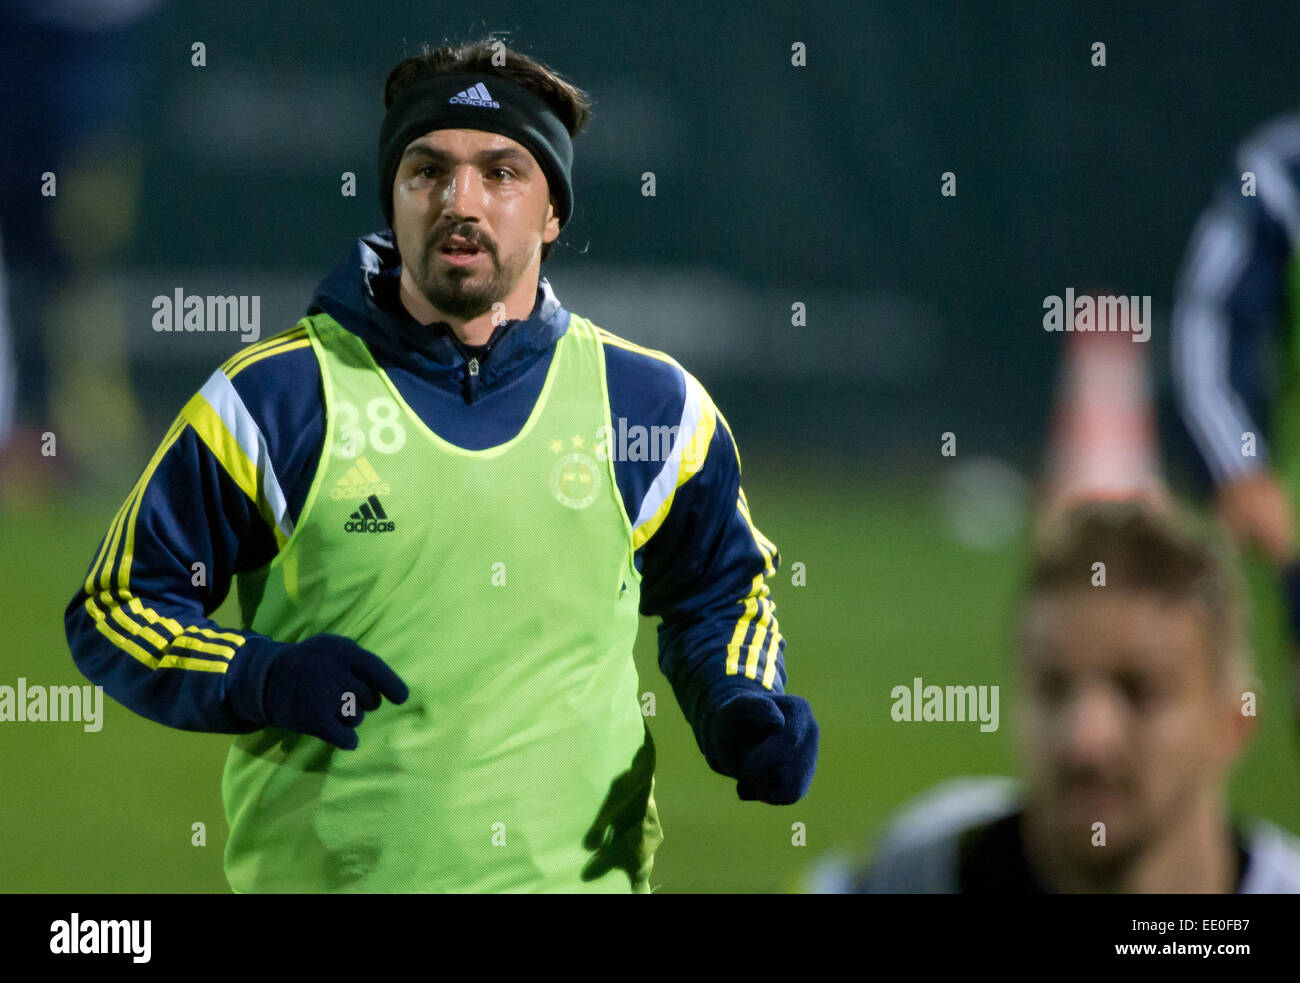 Belek, Turkey. 11th Jan, 2015. Fenerbahce Istanbul's soccer player Mehmet Topuz in action during a training session in Belek, Turkey, 11 January 2015. Fenerbahce stays in Belek to prepare for the second half of the Super Lig season. Photo: Soeren Stache/dpa/Alamy Live News Stock Photo